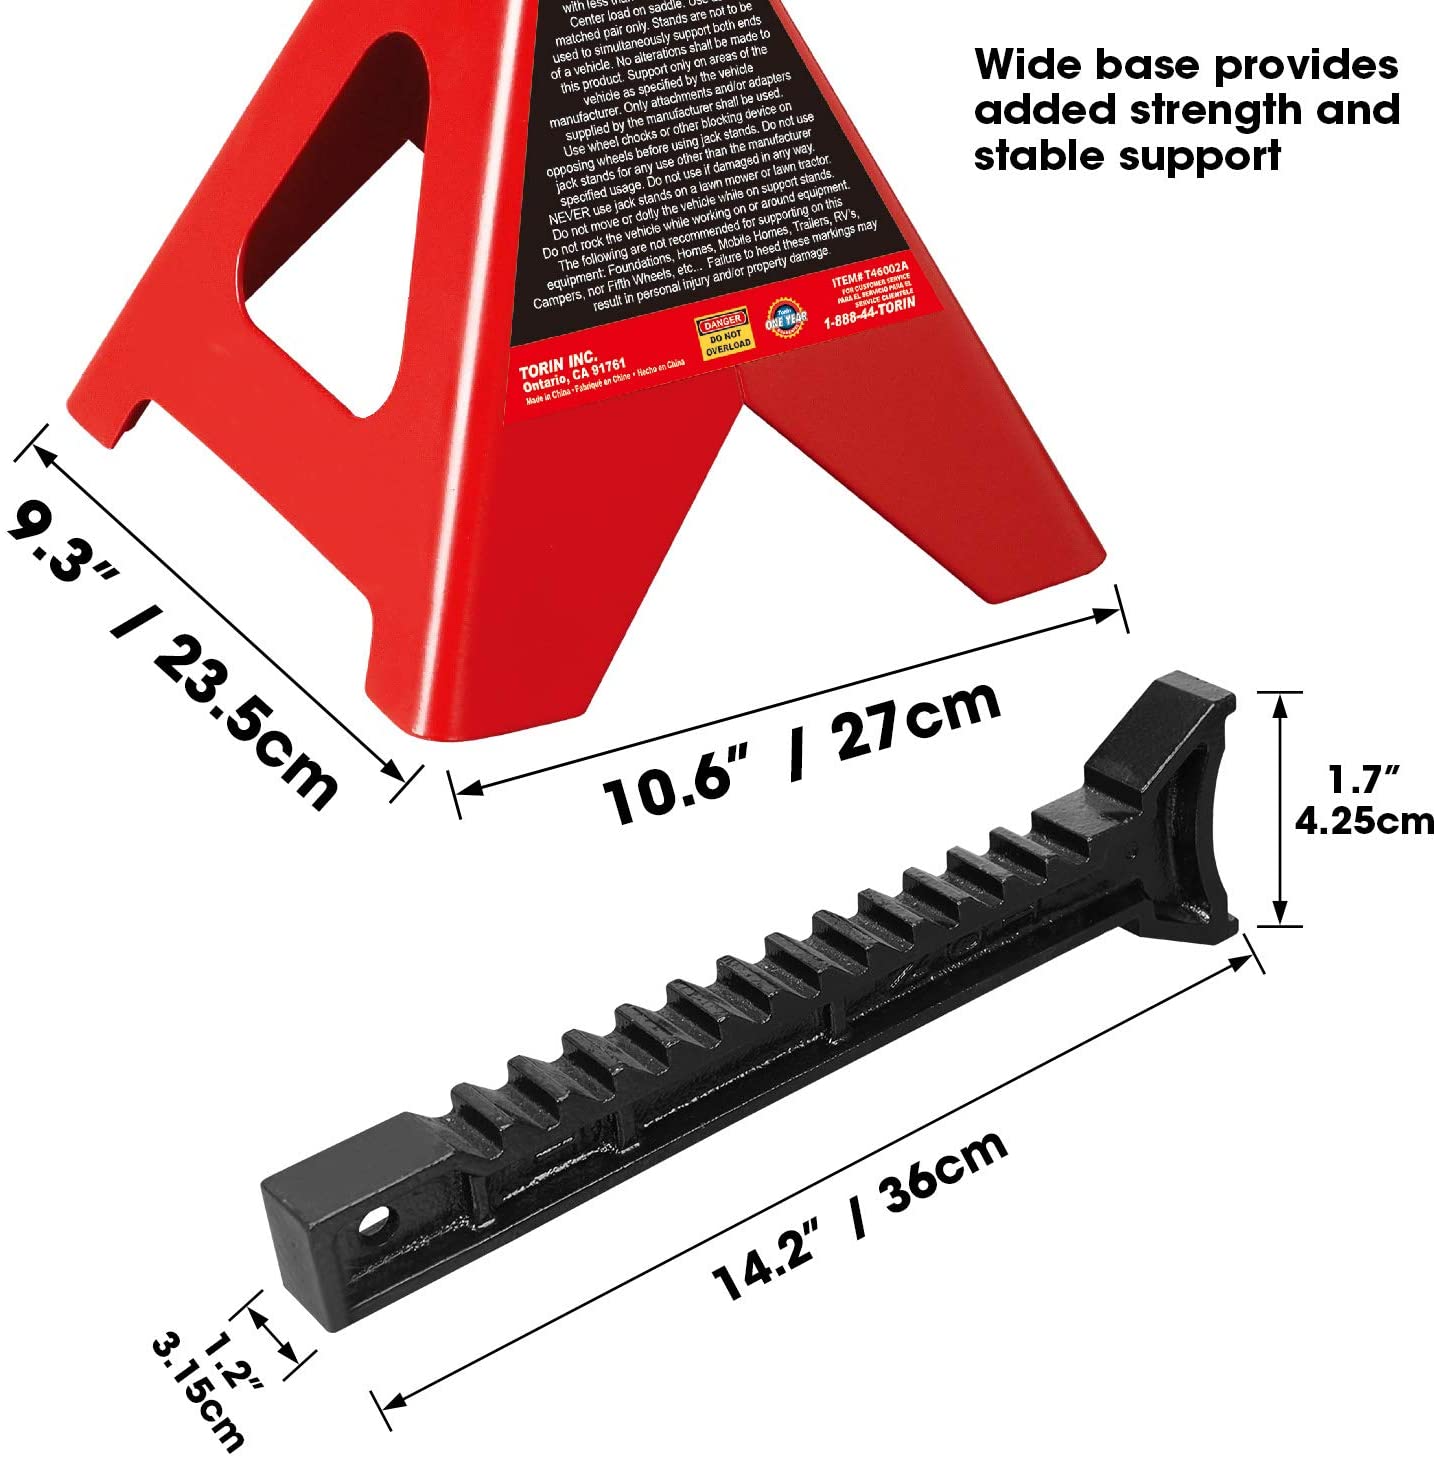 Big Red T43002A Torin Jack Stand specs